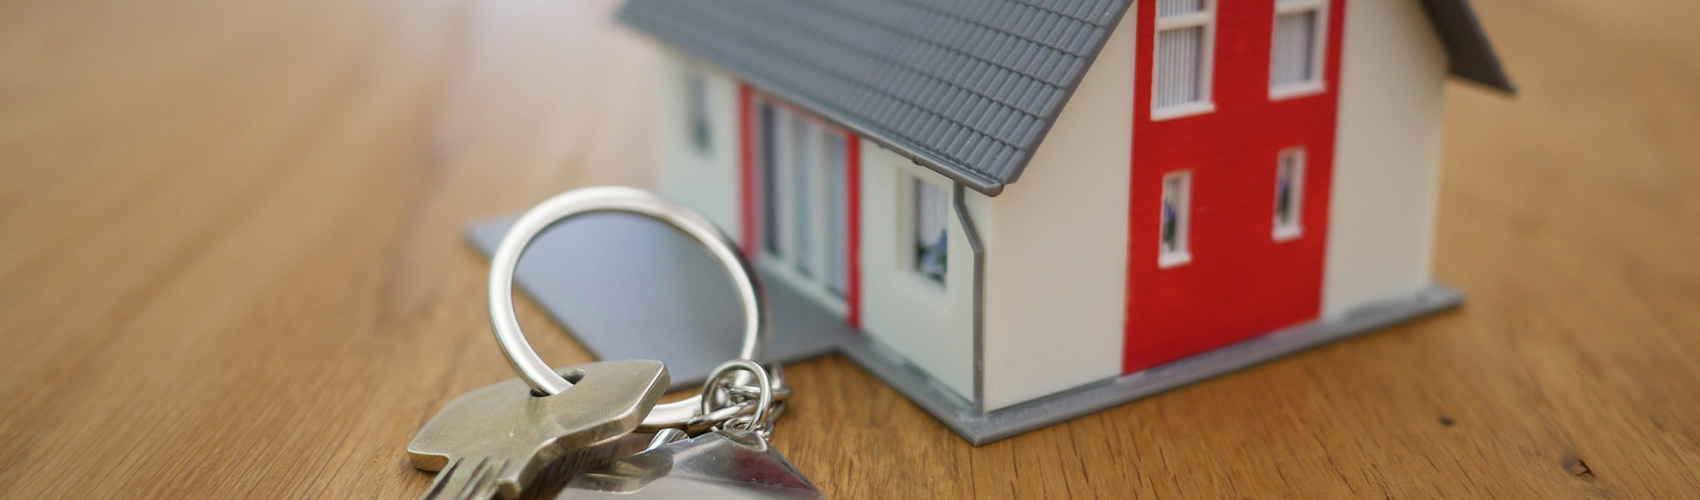 keychain of a miniature home with a house key on the key ring